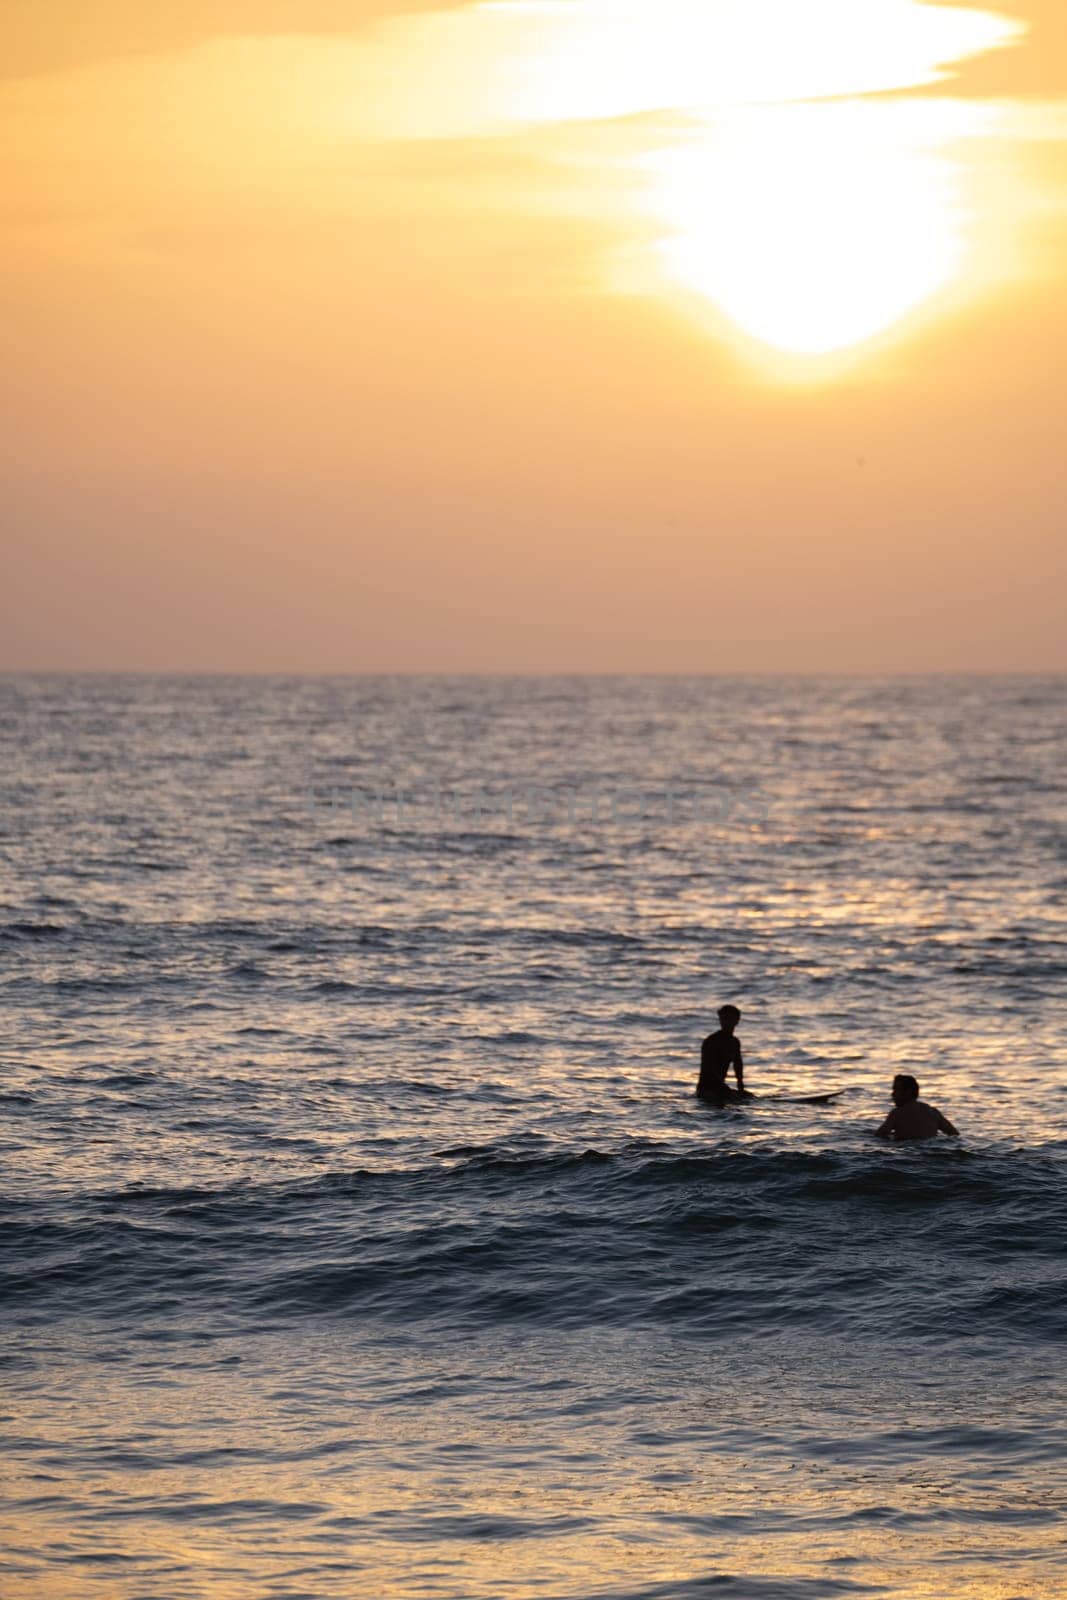 Surfer silhouettes in the Atlantic Ocean from Furadouro Beach at sunset and golden hour, Ovar - Portugal.